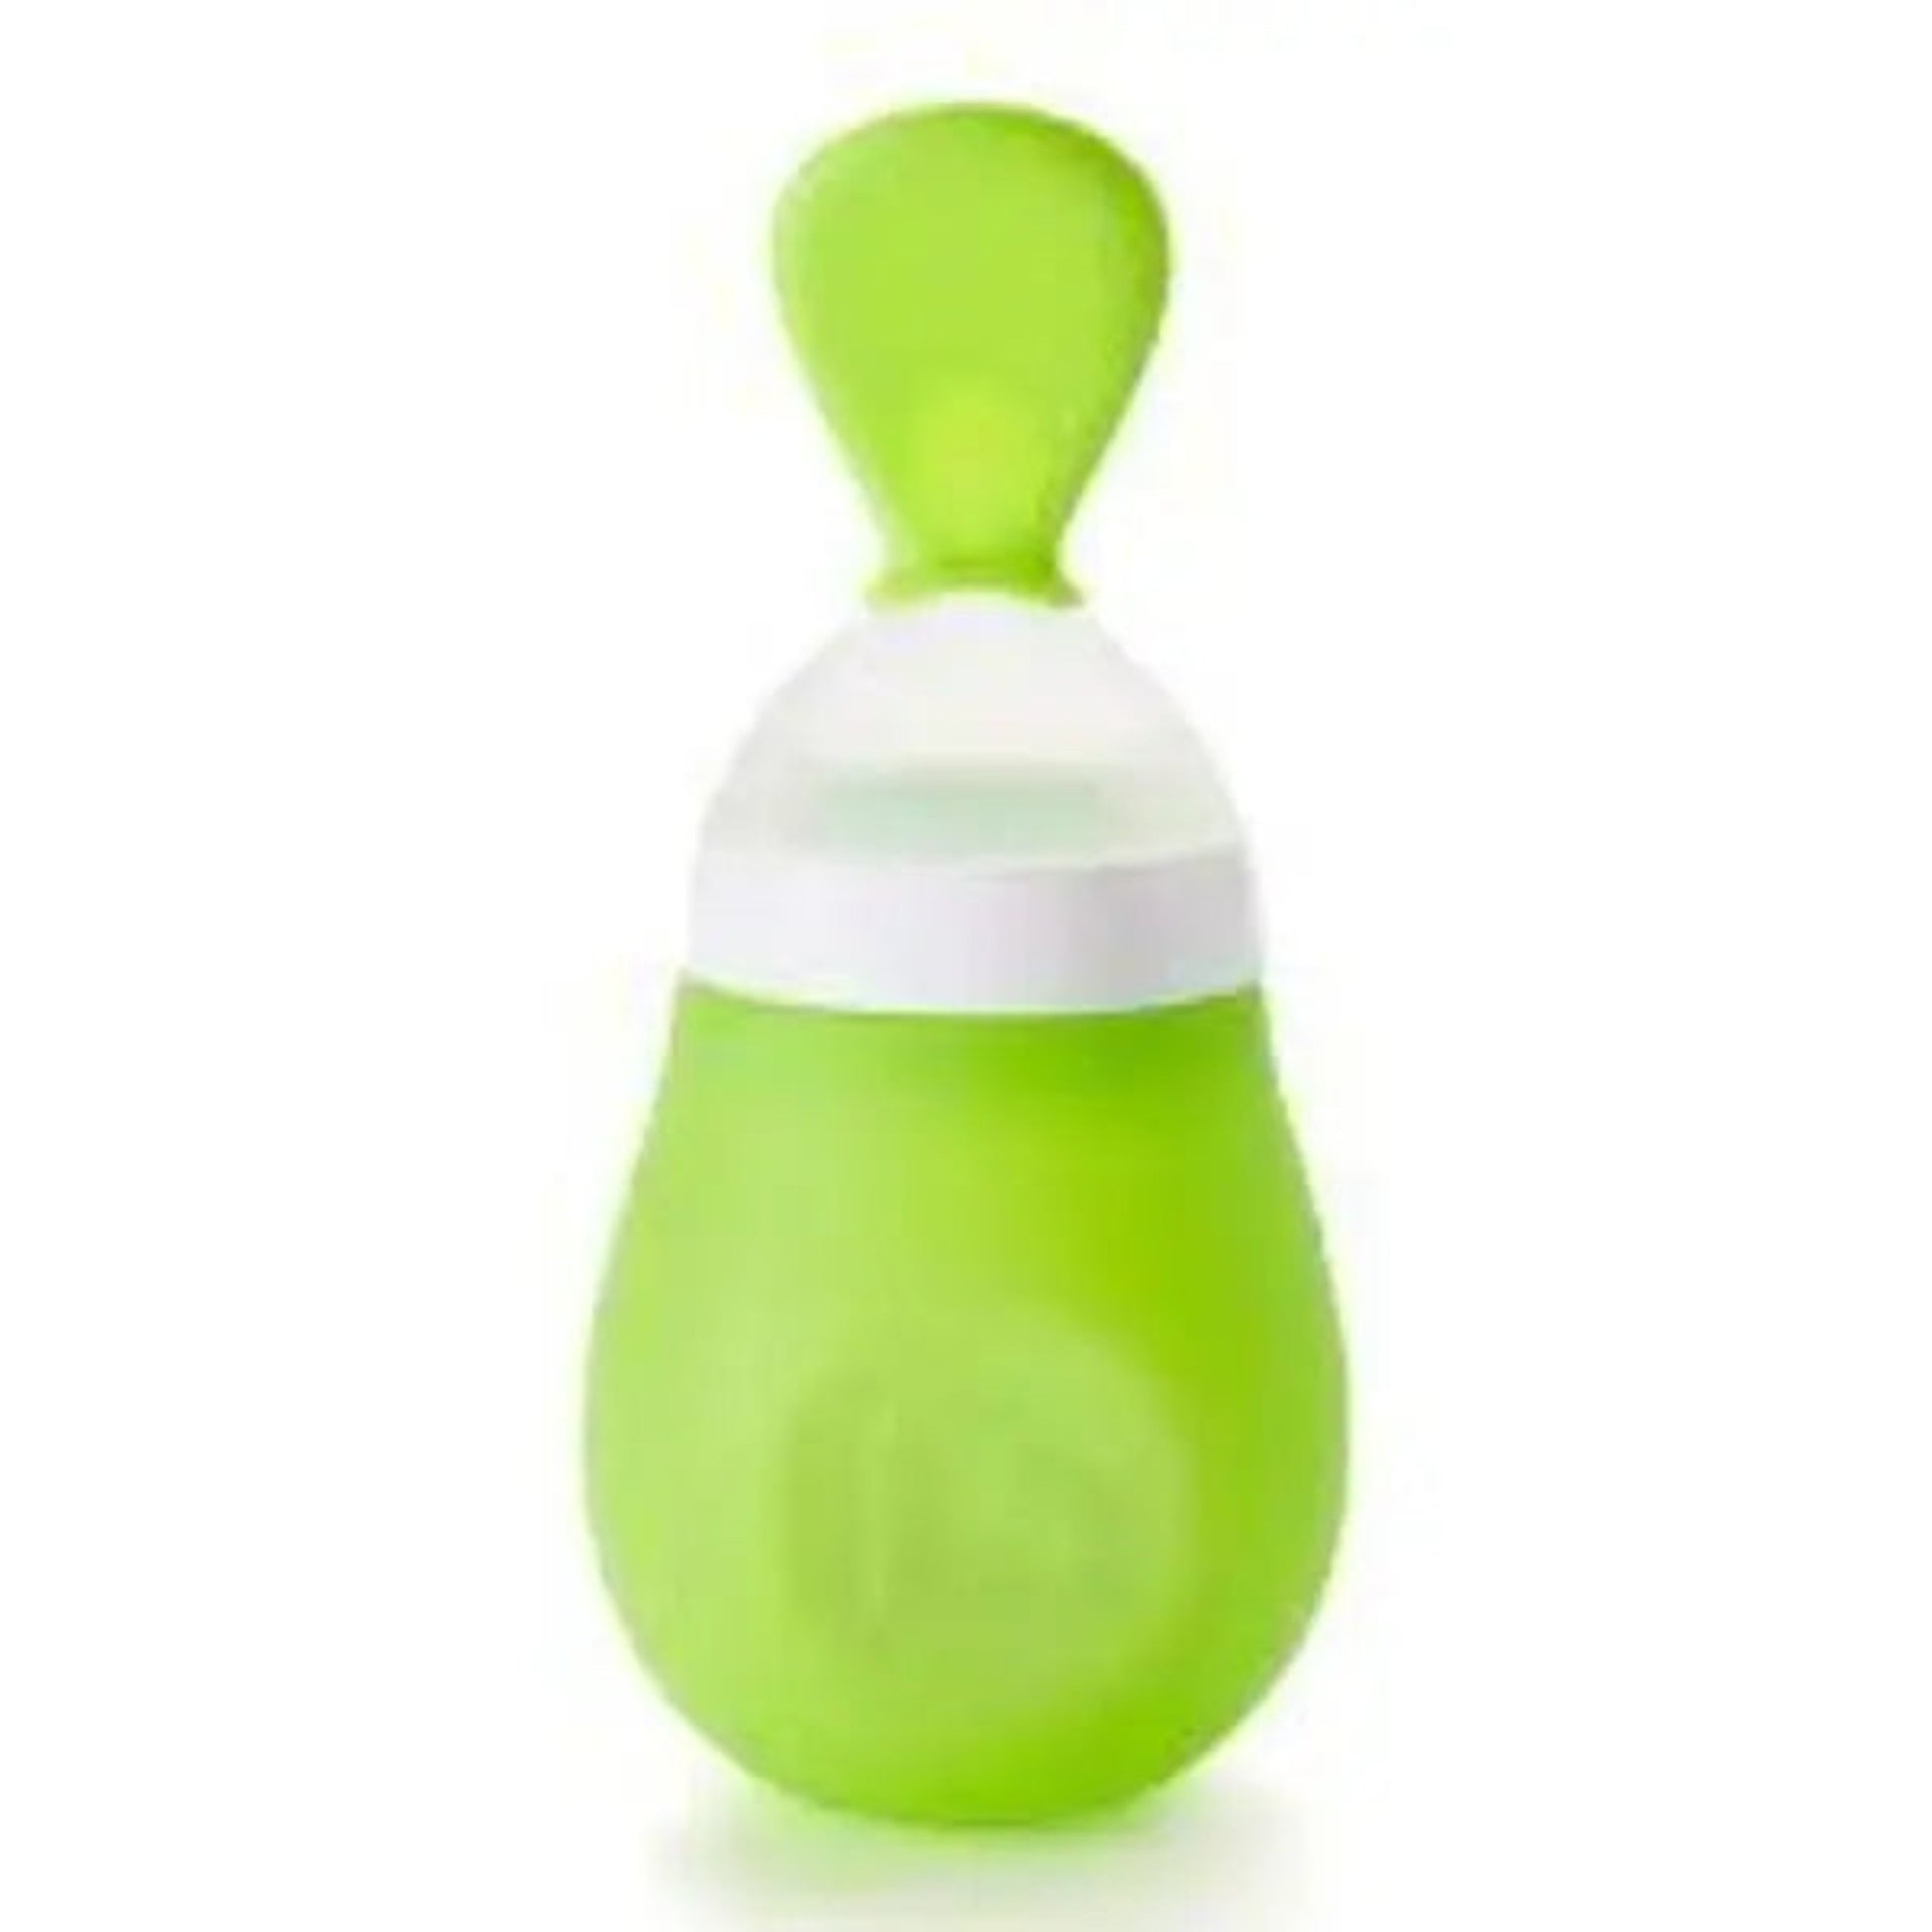 Bowls & Spoons Munchkin Squeeze Spoon for baby Munchkin 16.99